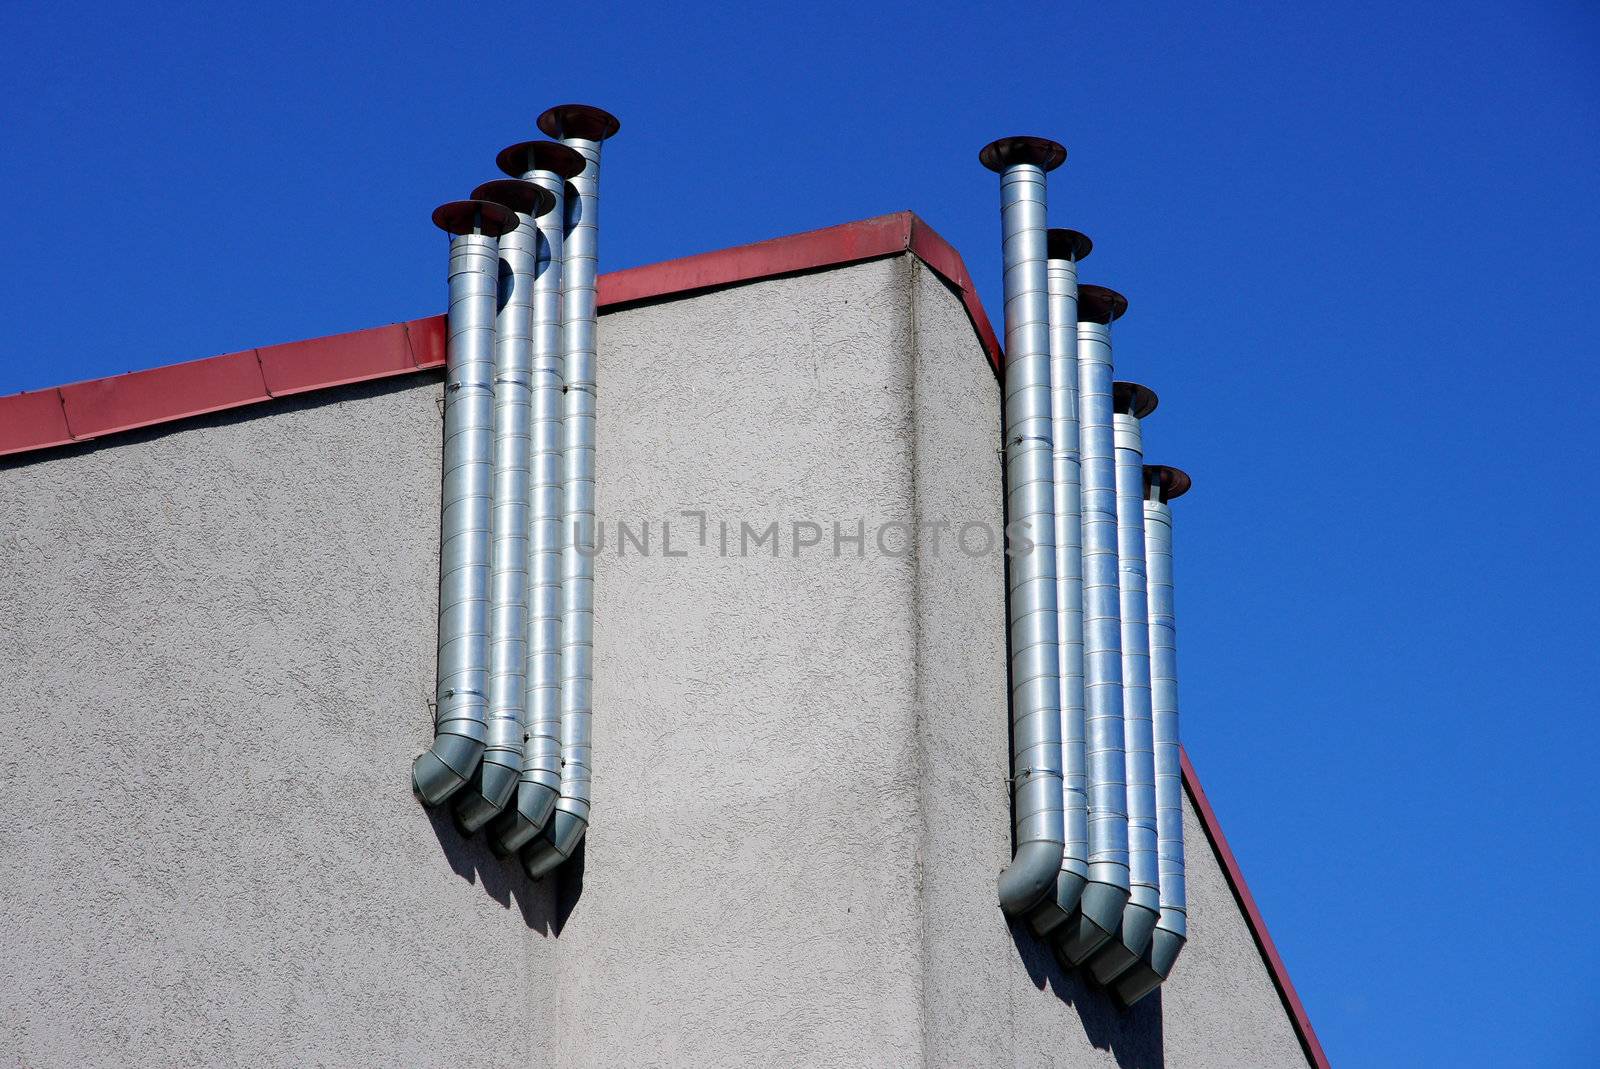 Metal pipes are located in one line